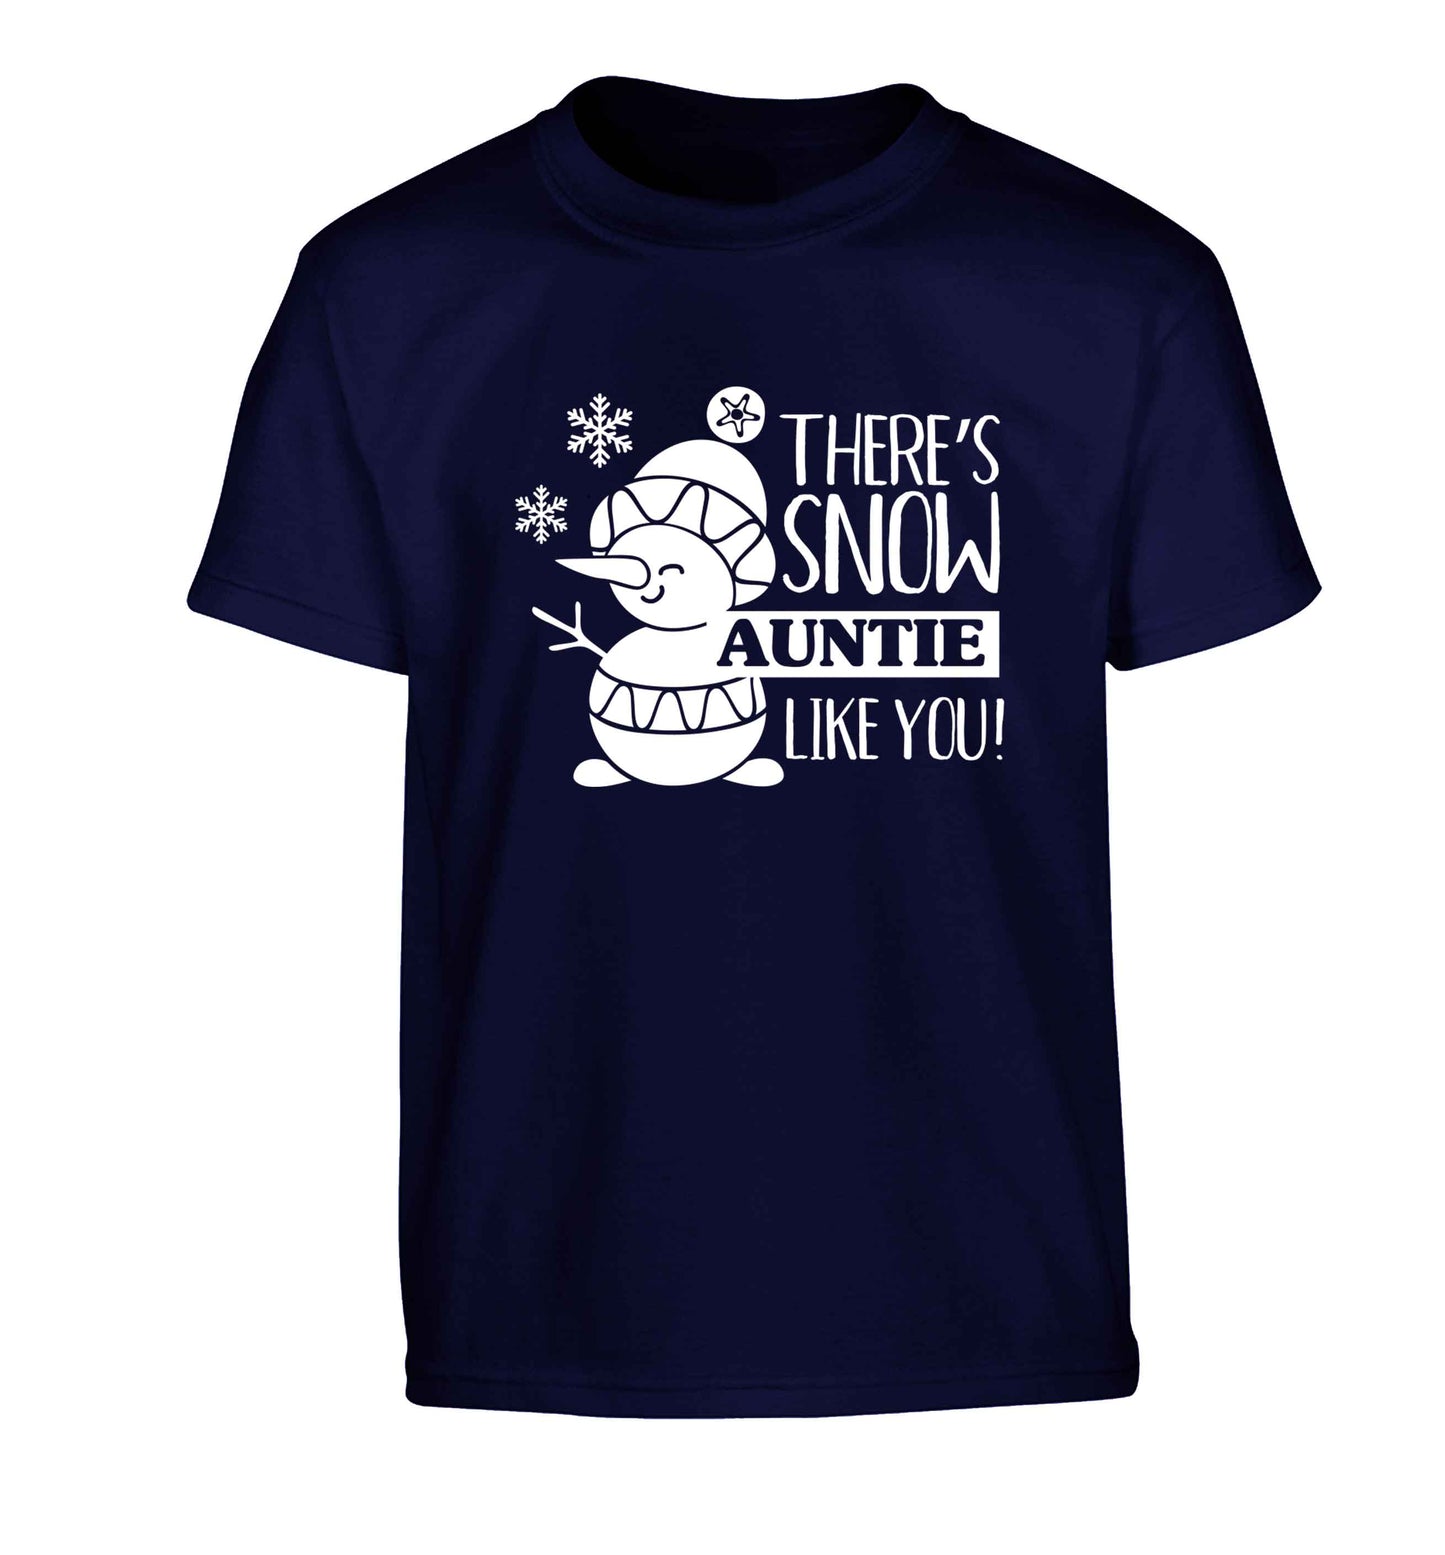 There's snow auntie like you Children's navy Tshirt 12-13 Years